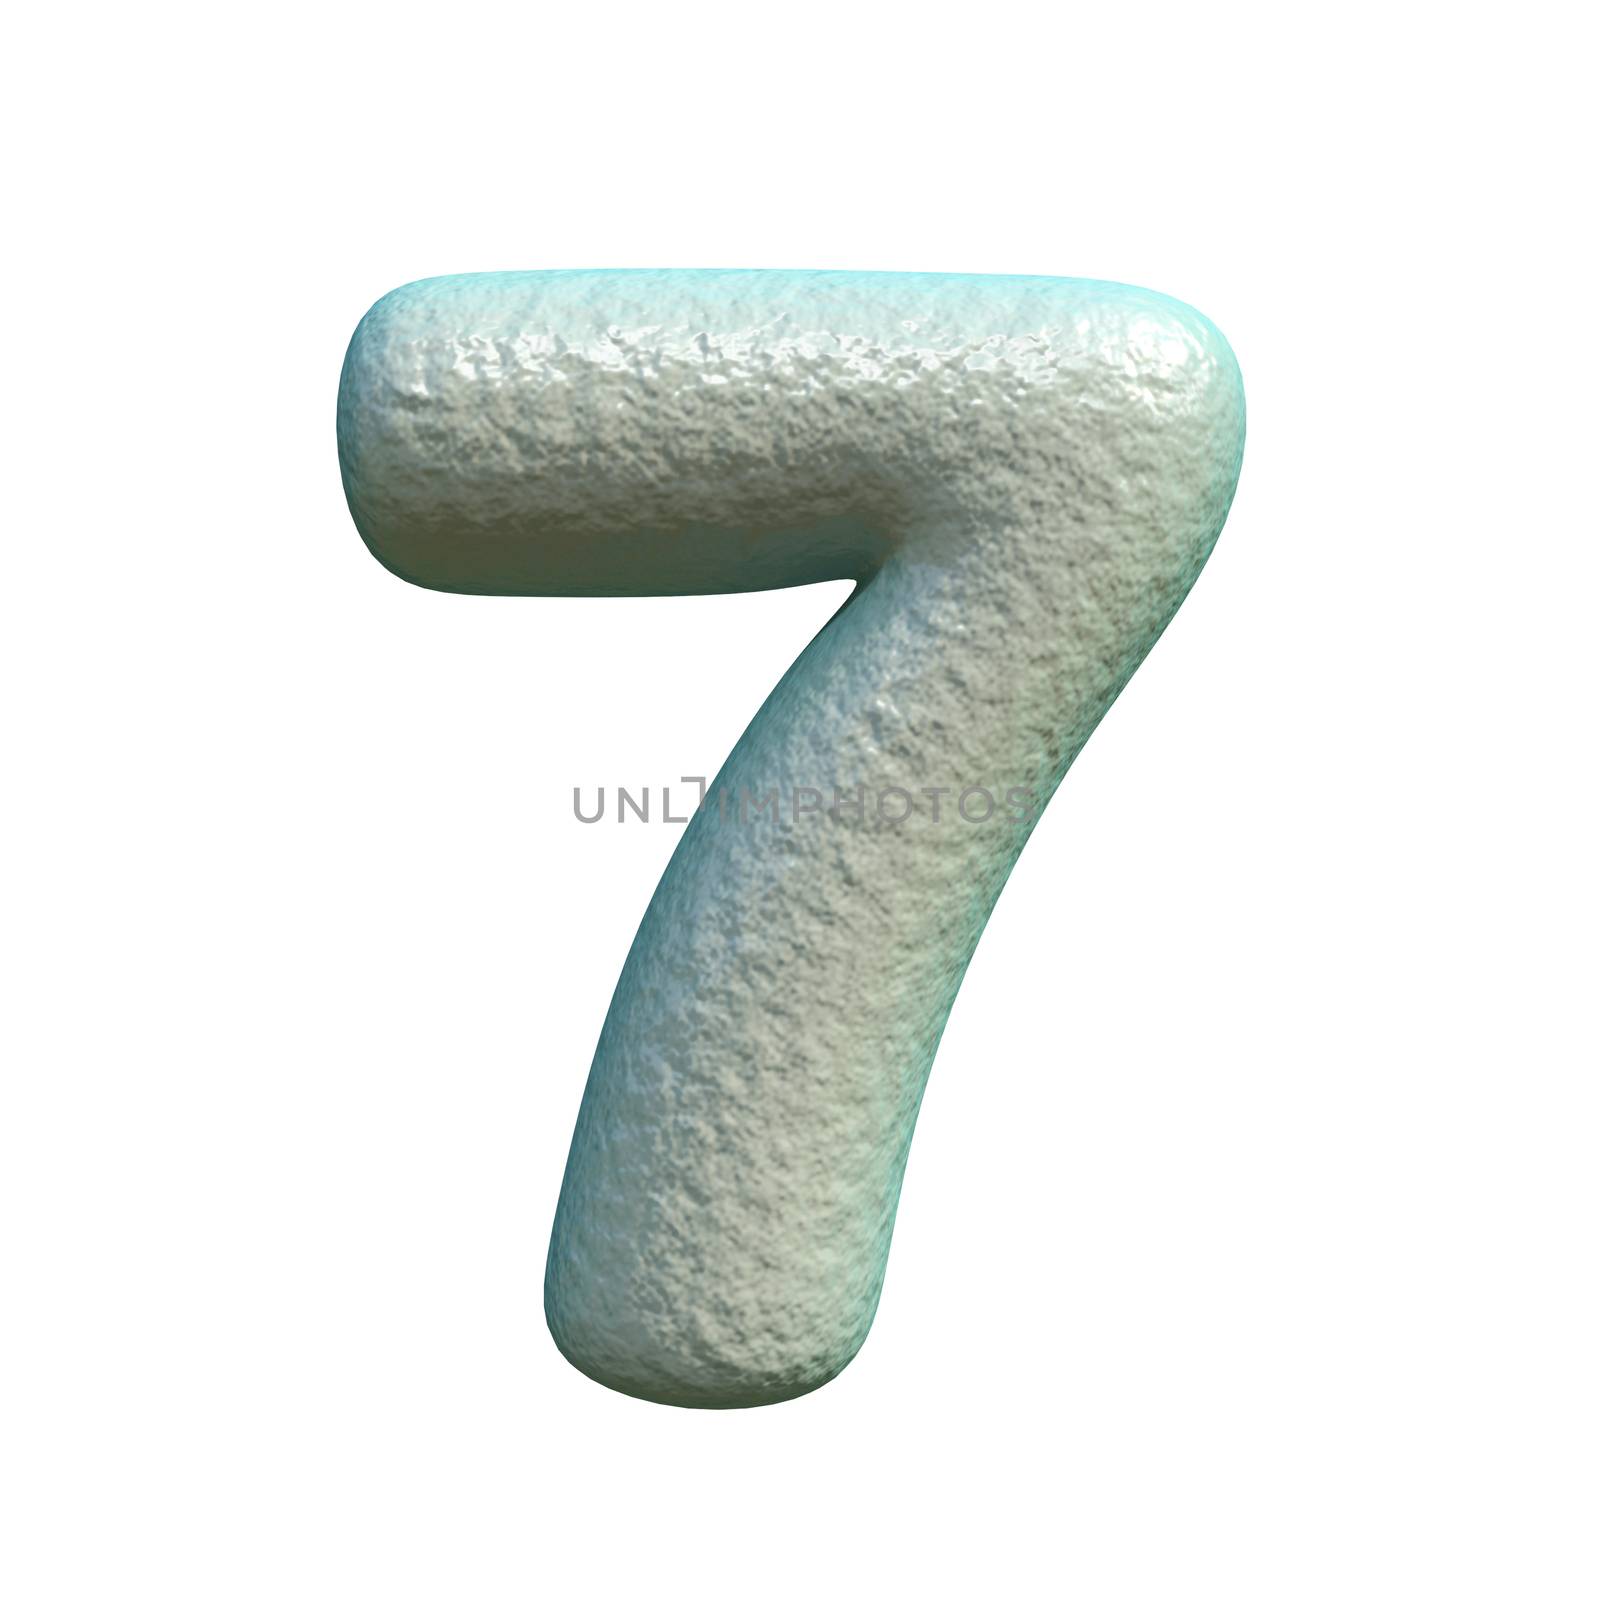 Grey blue clay Number 7 SEVEN 3D rendering illustration isolated on white background